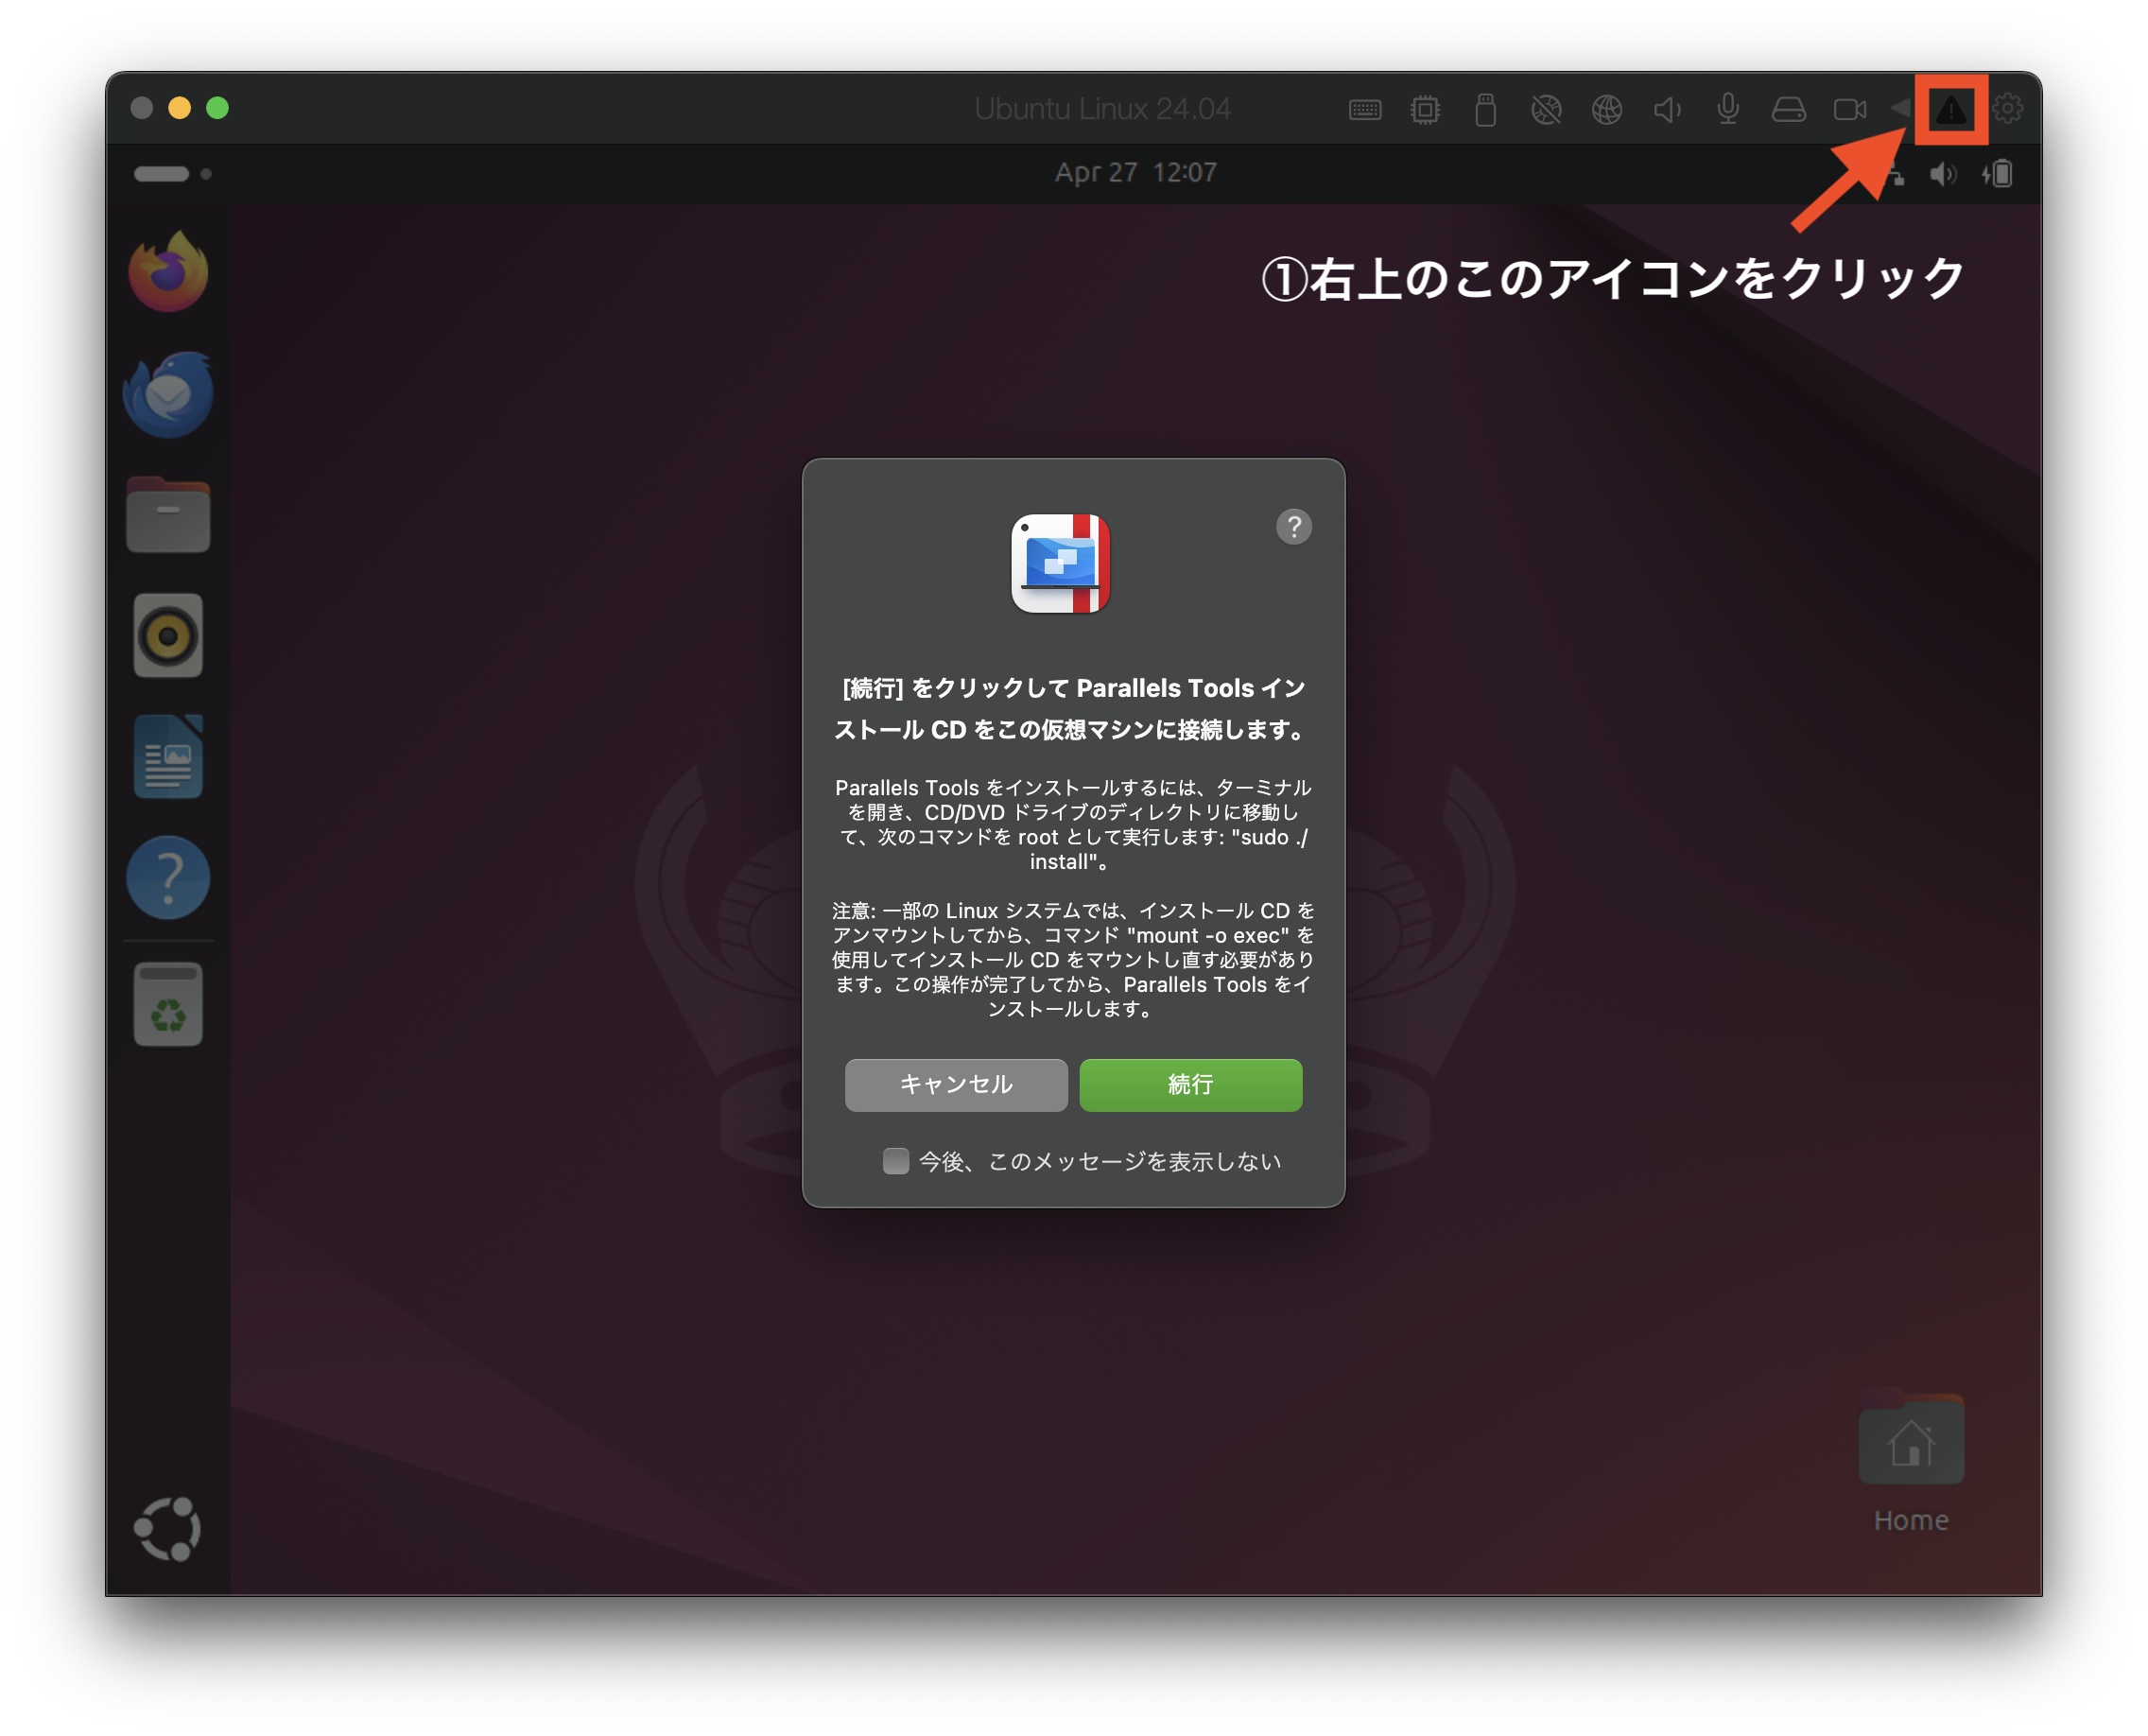 Parallels Toolsのインストール 1/3